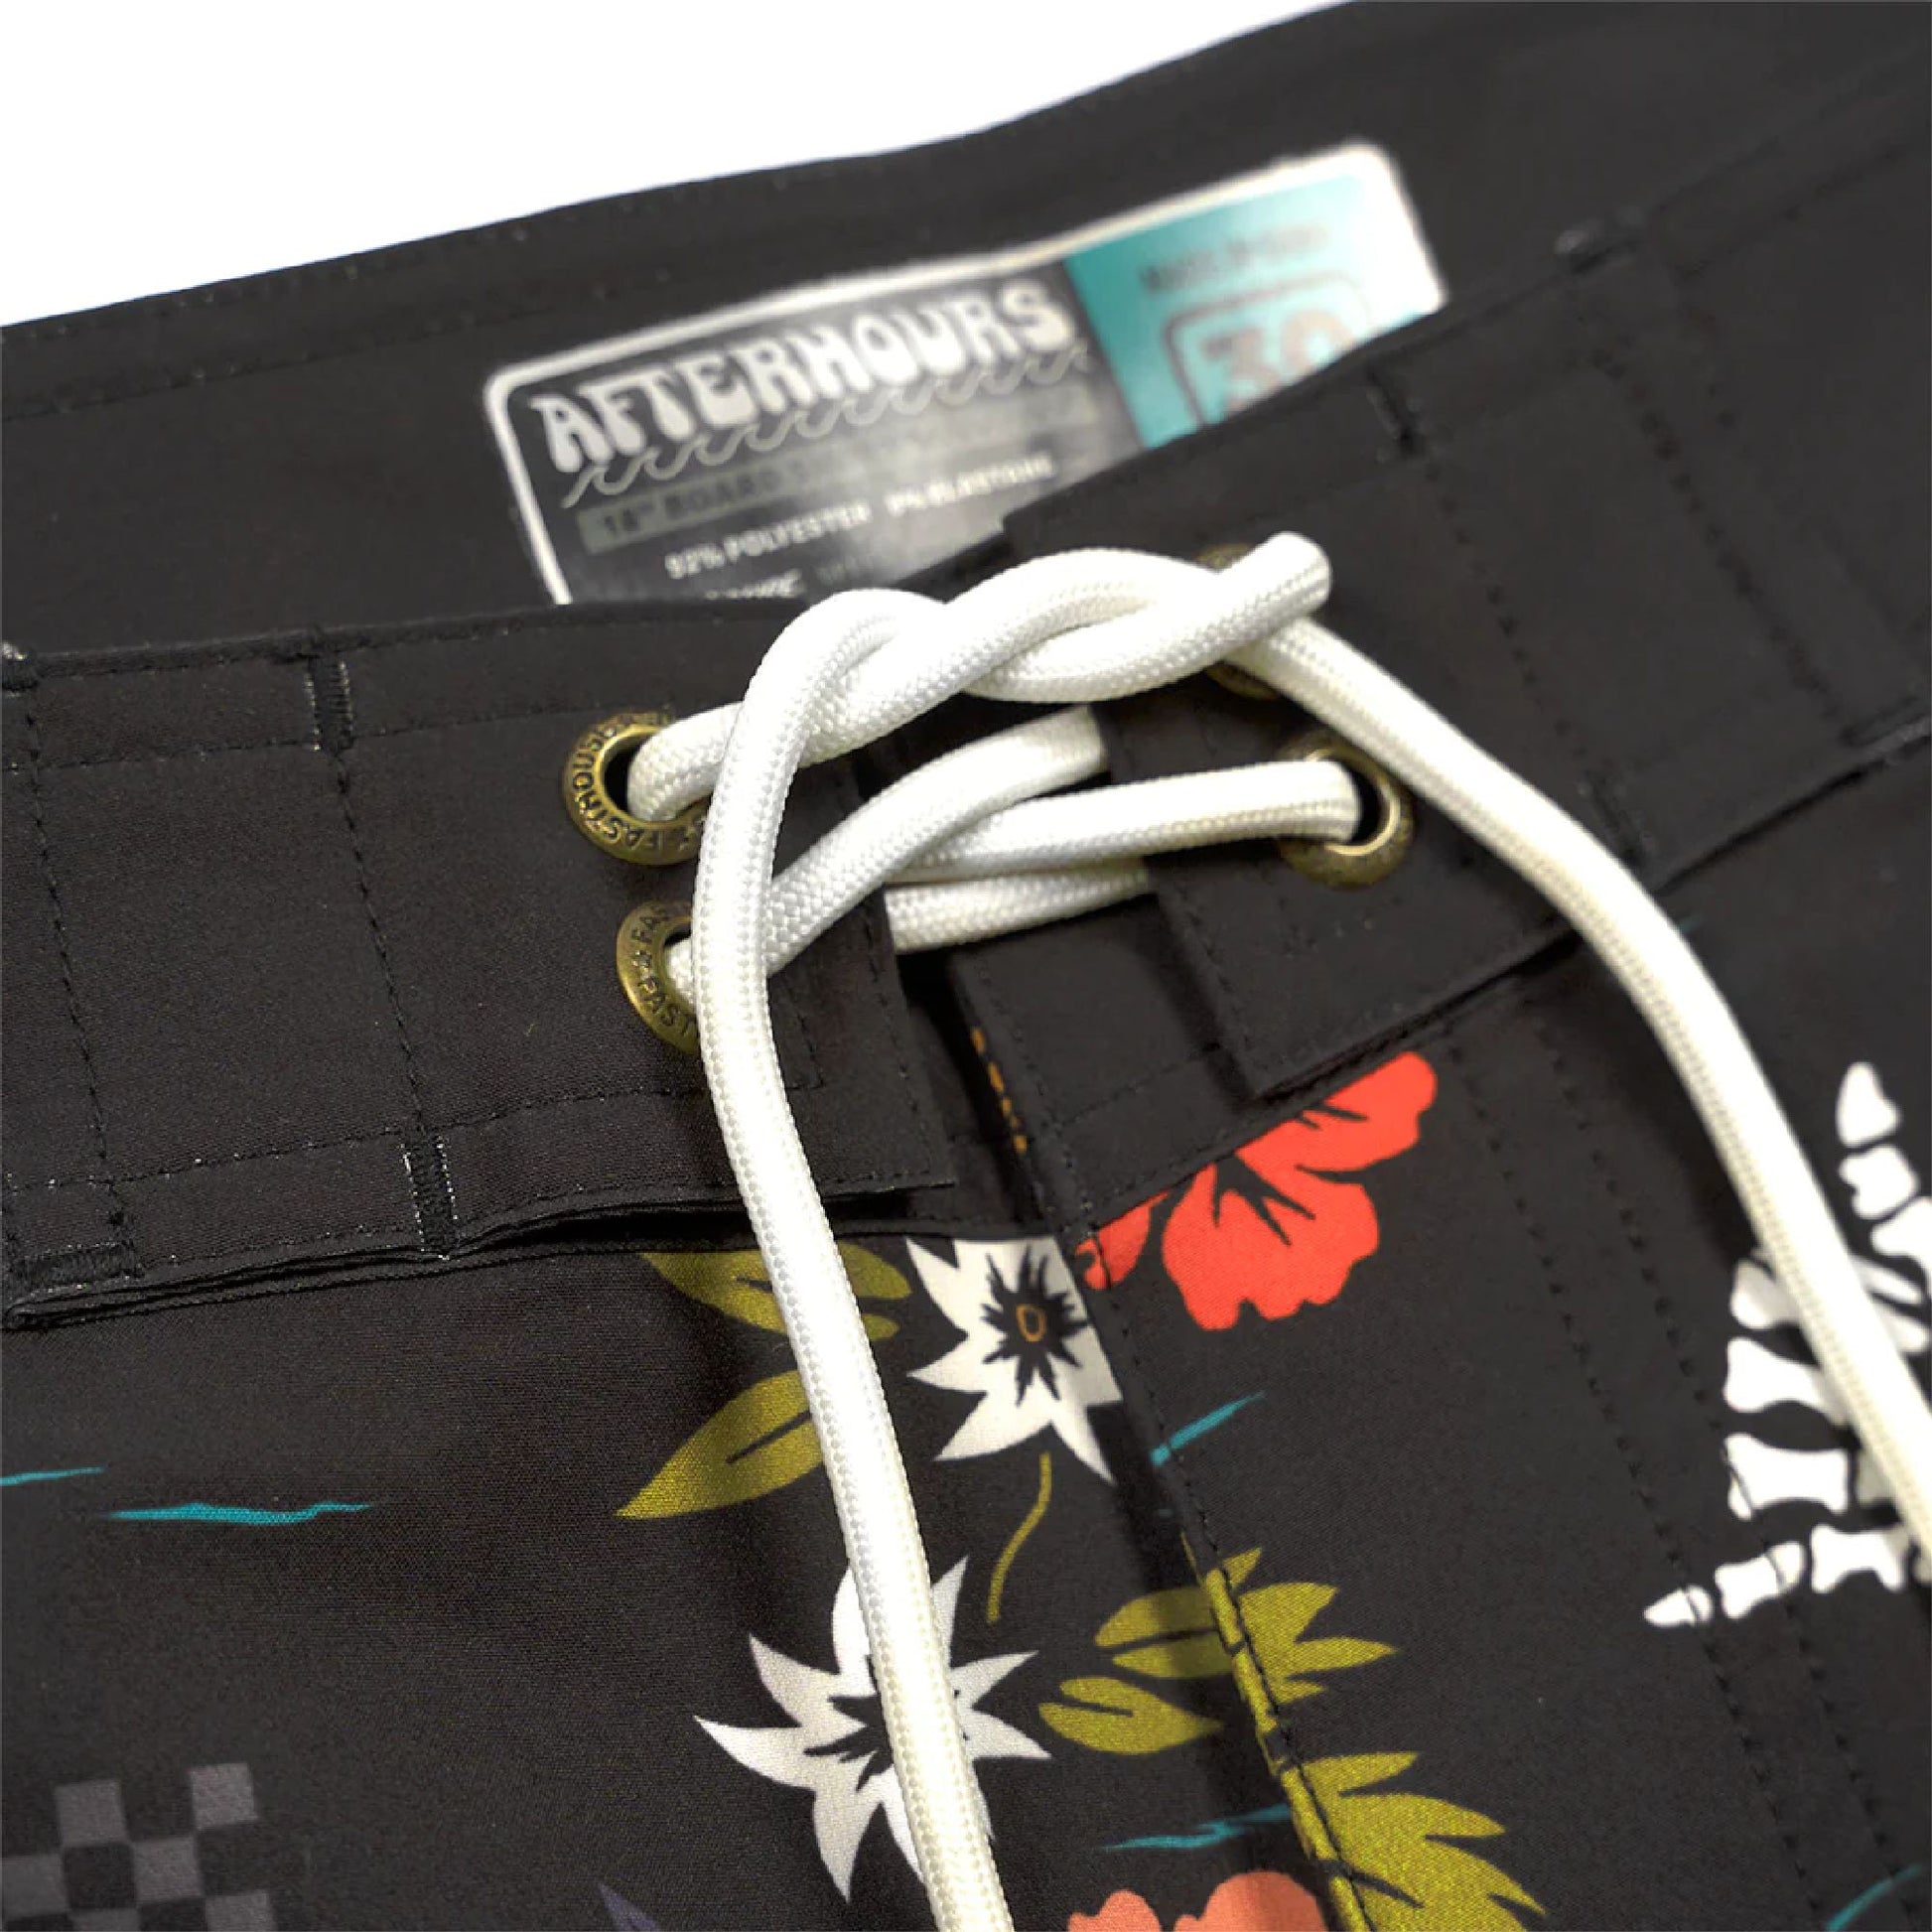 Fasthouse After Hours 18" Tribe Boardshort Black - Fasthouse Swimwear